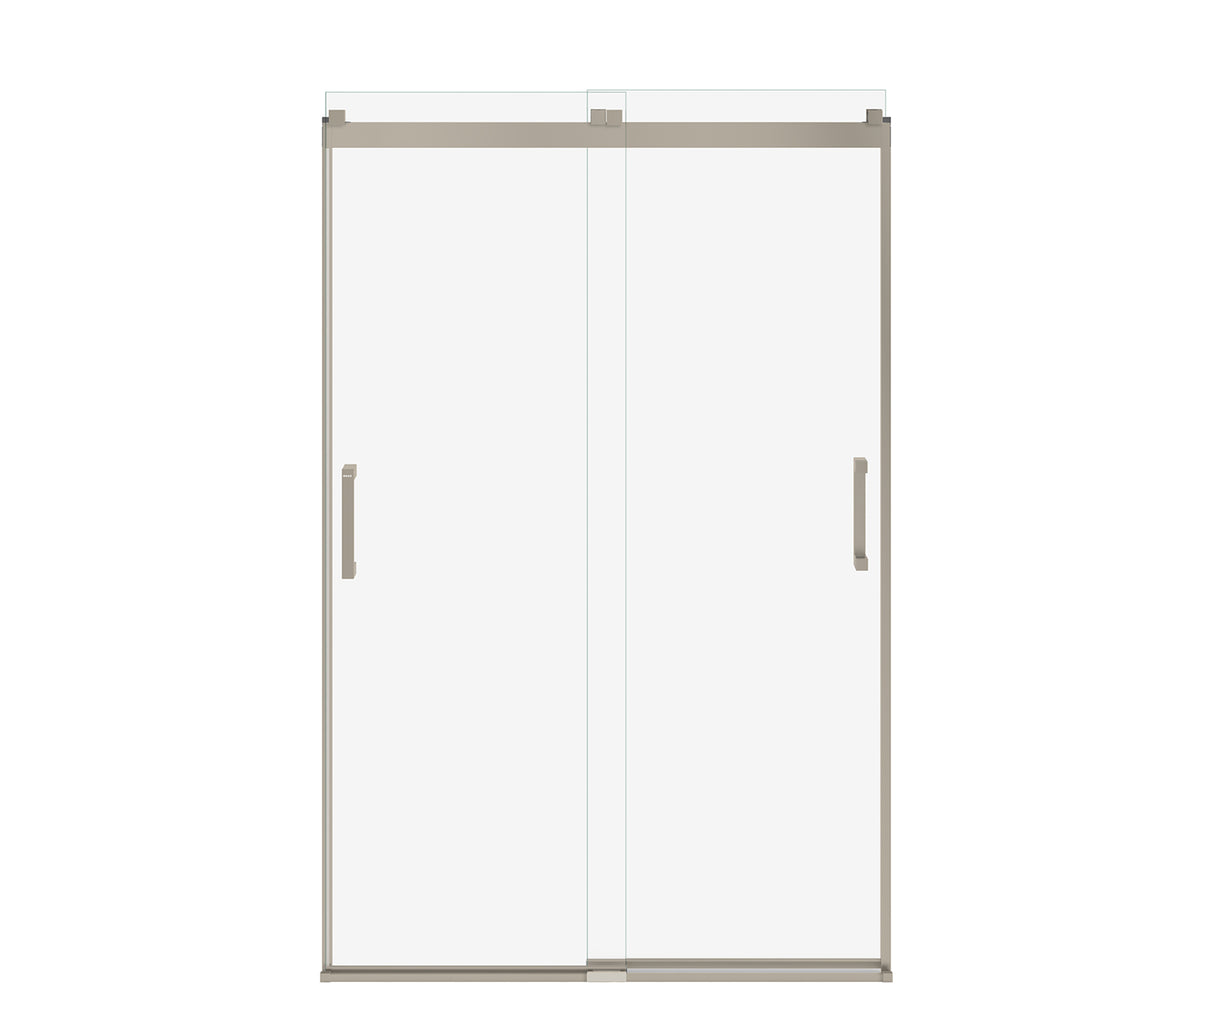 MAAX 135690-900-305-000 Revelation Square 44-47 x 70 ½-73 in. 6 mm Bypass Shower Door for Alcove Installation with Clear glass in Brushed Nickel